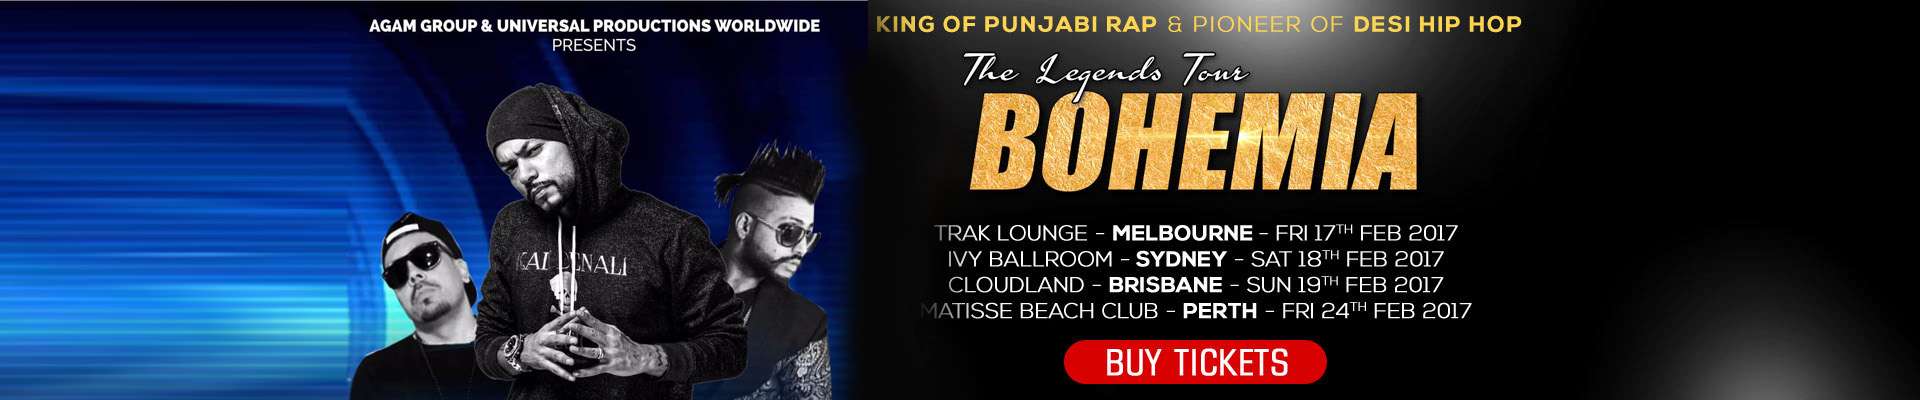 The Legend Bohemia Live In Sydney 2017